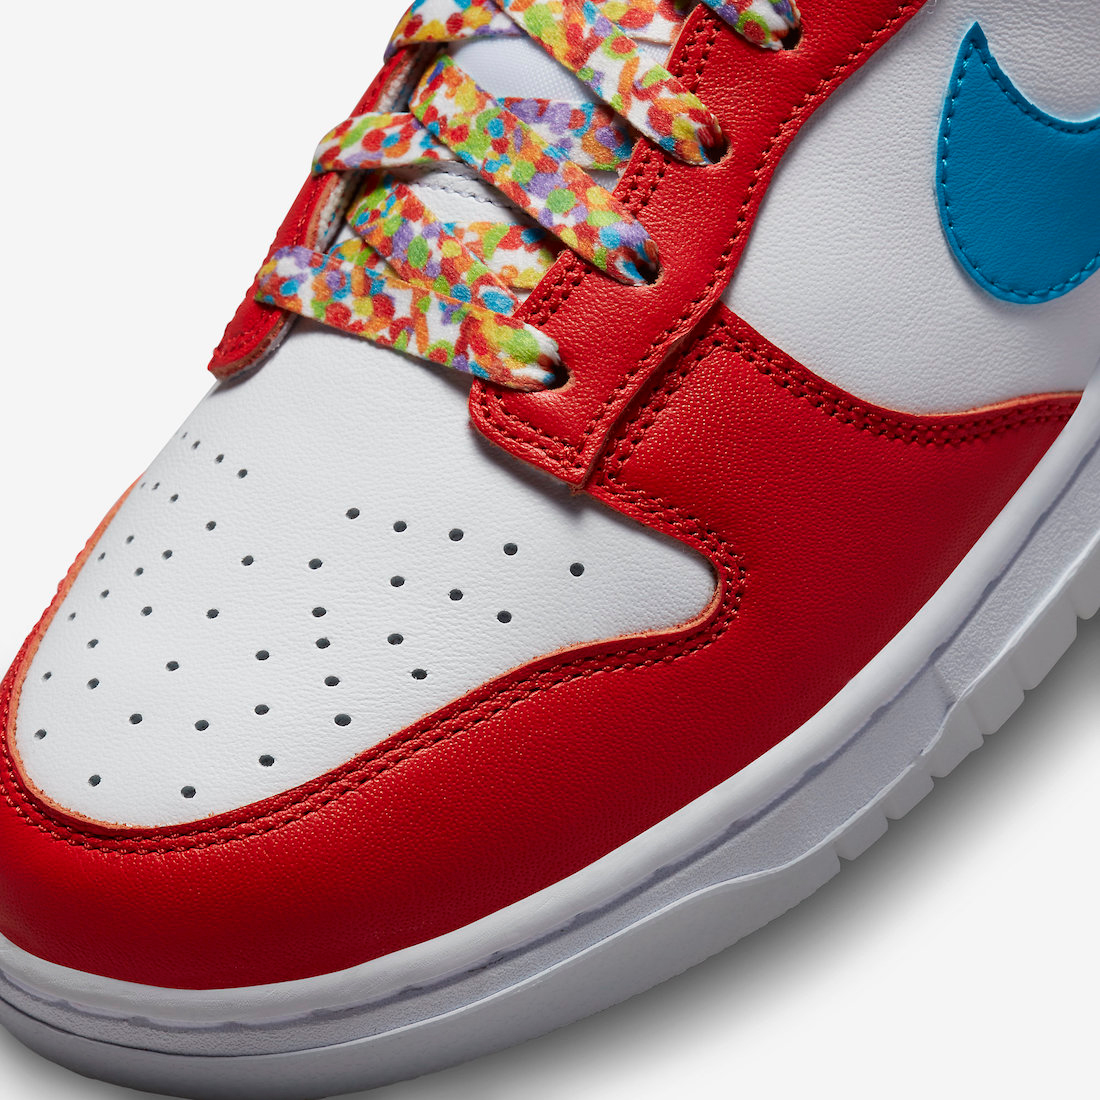 Nike-Dunk-Low-Fruity-Pebbles-LeBron-James-Release-Date-8